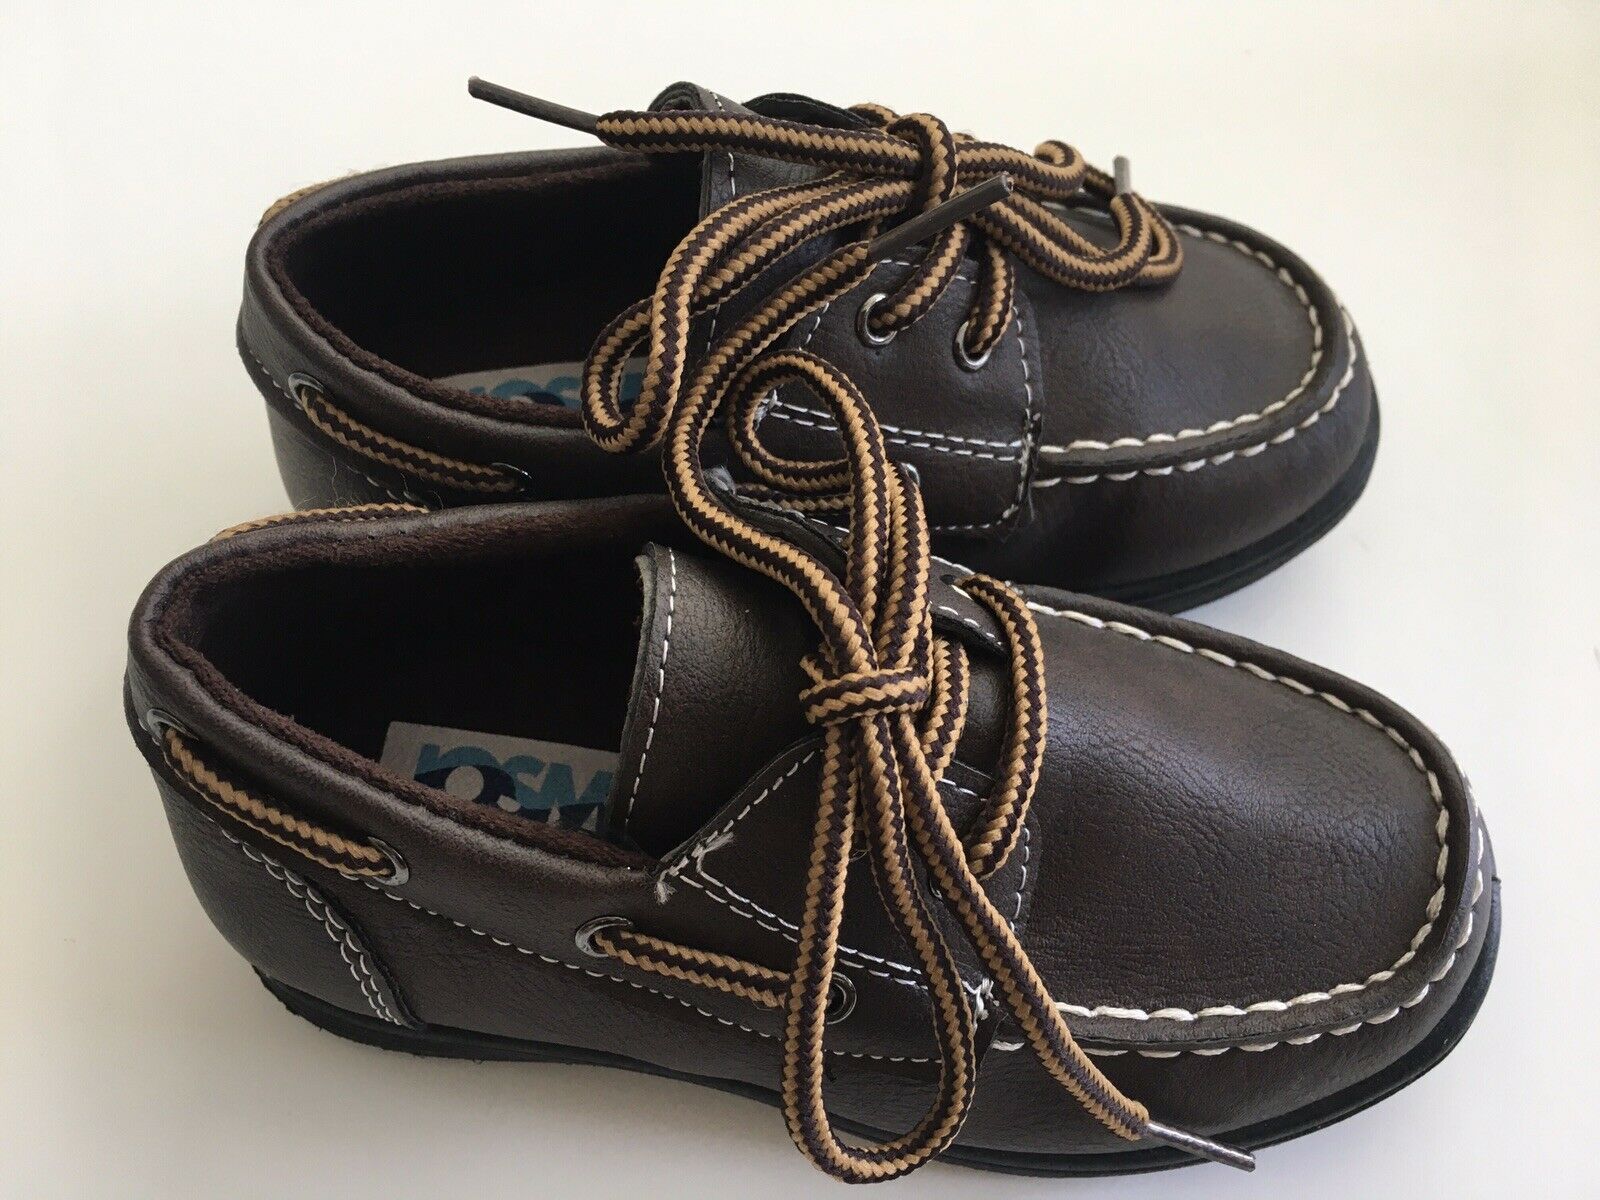 Josmo Toddler Boys Brown Casual Dress Shoes Size 7